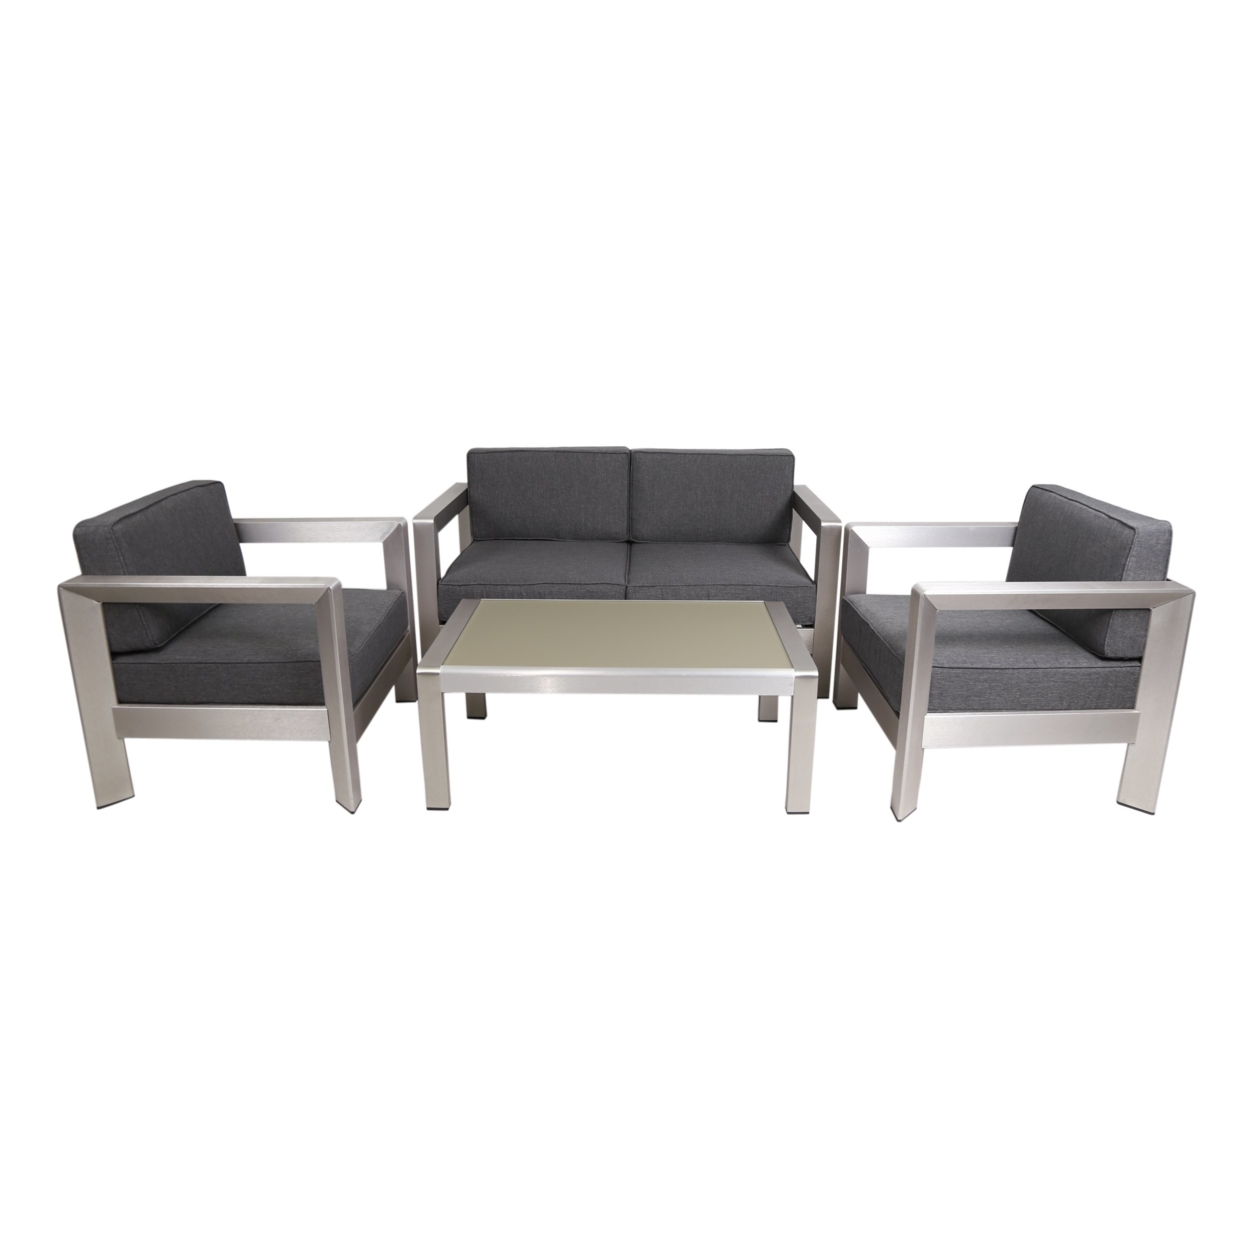 Kenia Outdoor 4-Seater Aluminum Chat Set With Tempered Glass-Topped Coffee Table, Silver And Gray